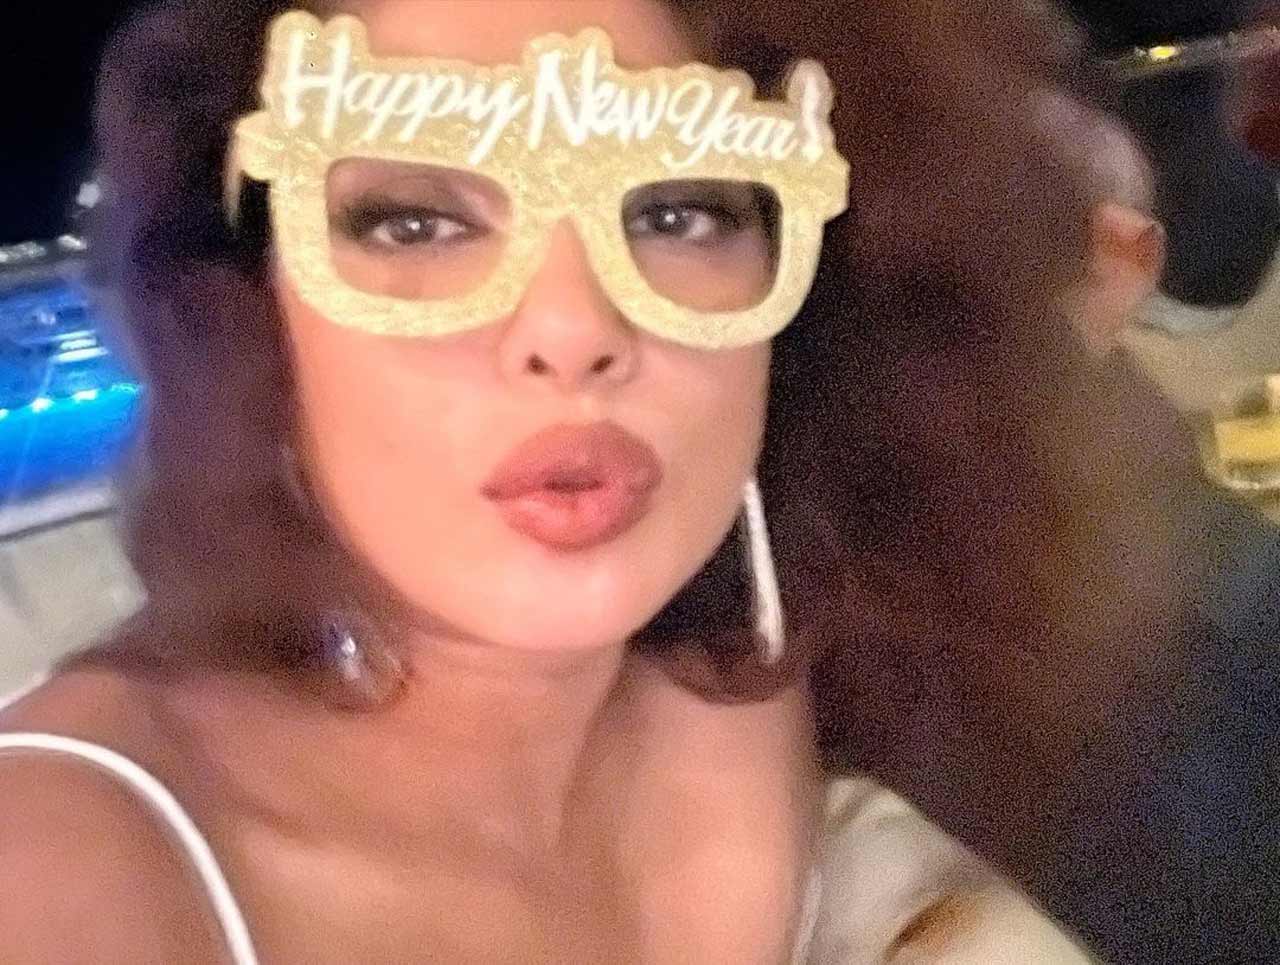 Global icon Priyanka Chopra has shared glimpses of her New Year celebration with husband and singer Nick Jonas, and we are loving the party vibe the actress has been sharing from the international waters.